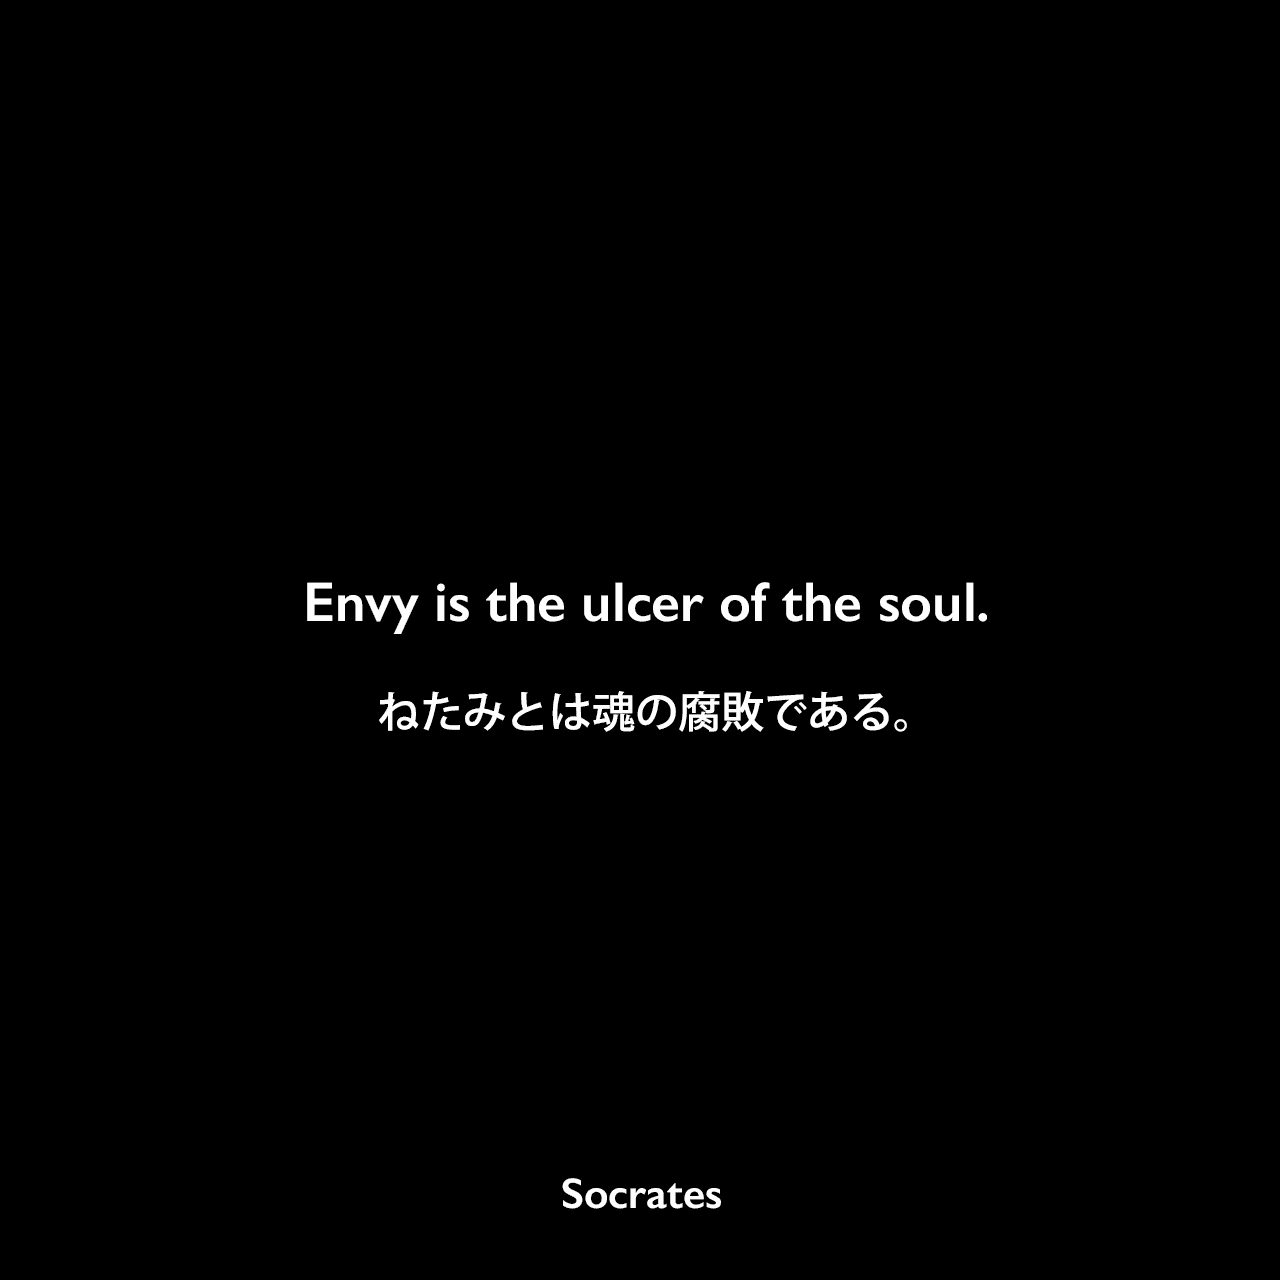 Envy is the ulcer of the soul.ねたみとは魂の腐敗である。Socrates